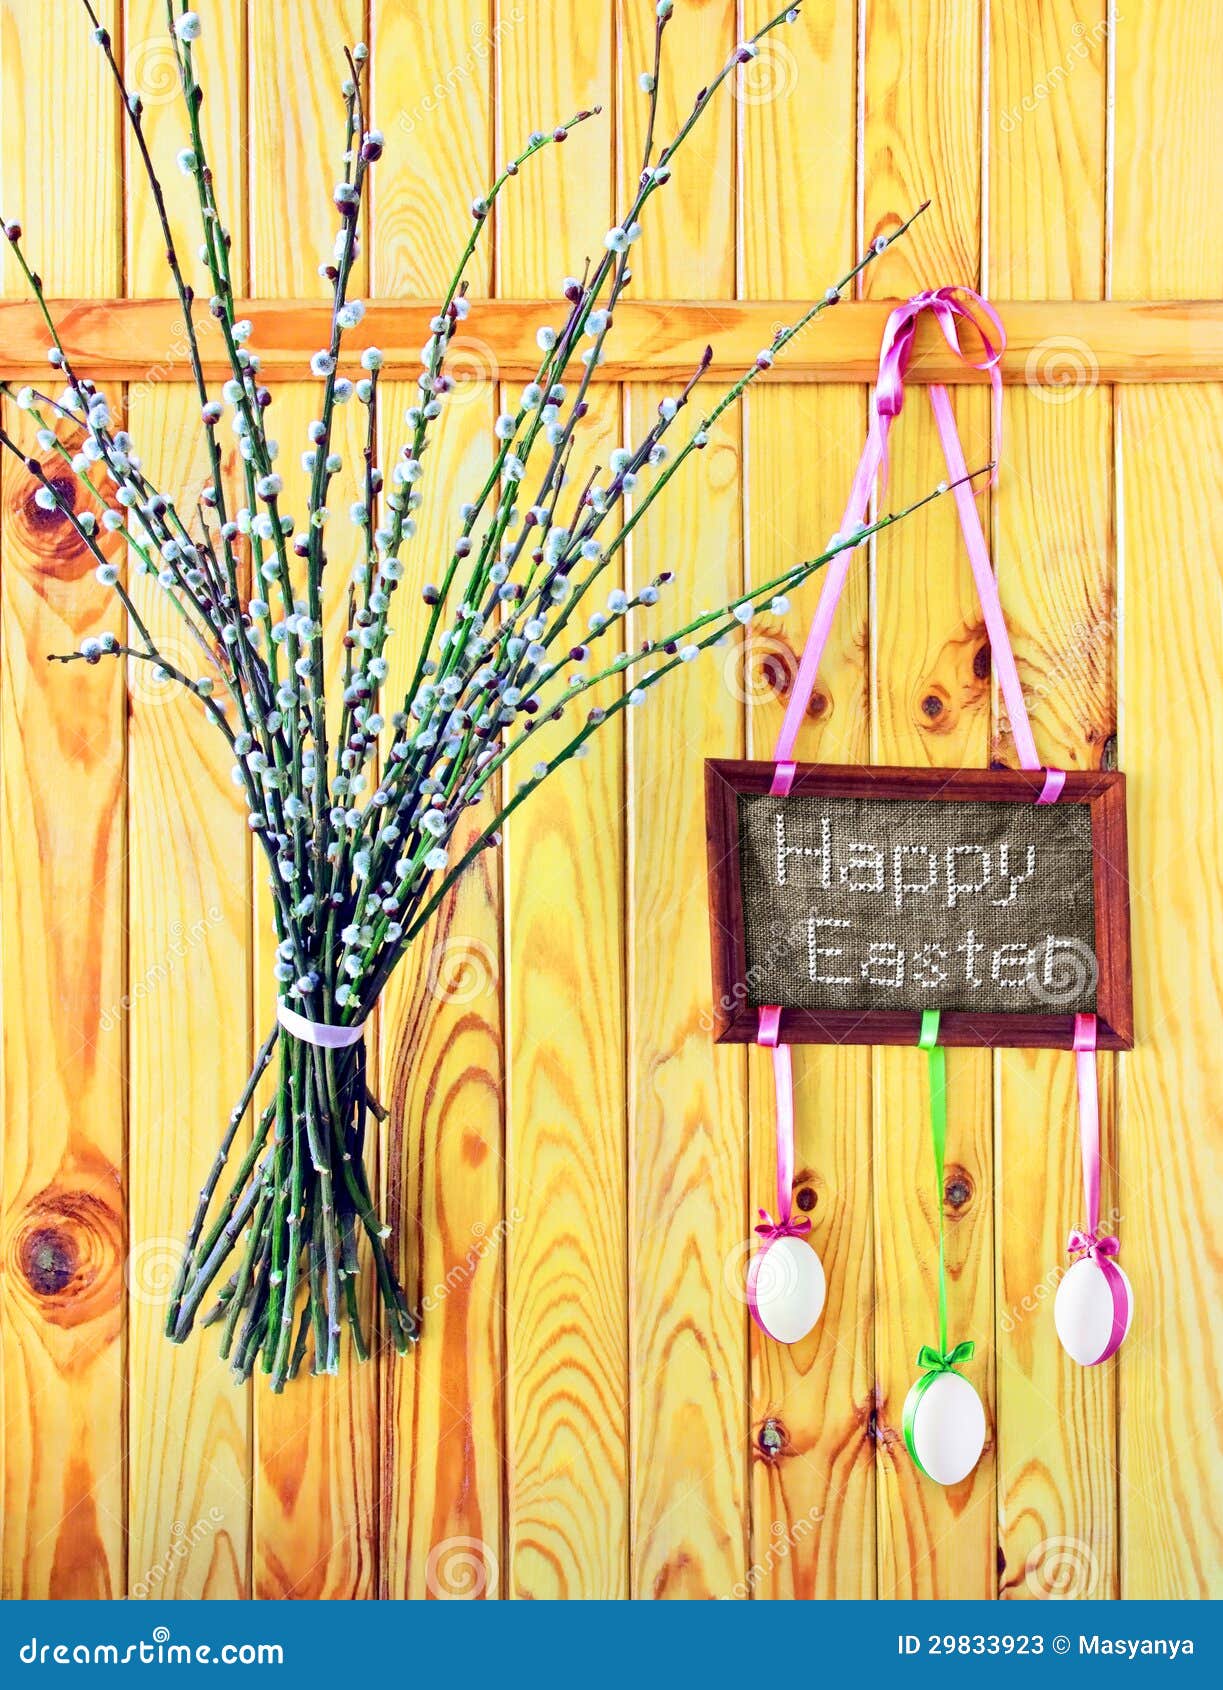 Wooden fence with embroidered 'Happy Easter' greeting, eggs and willow 